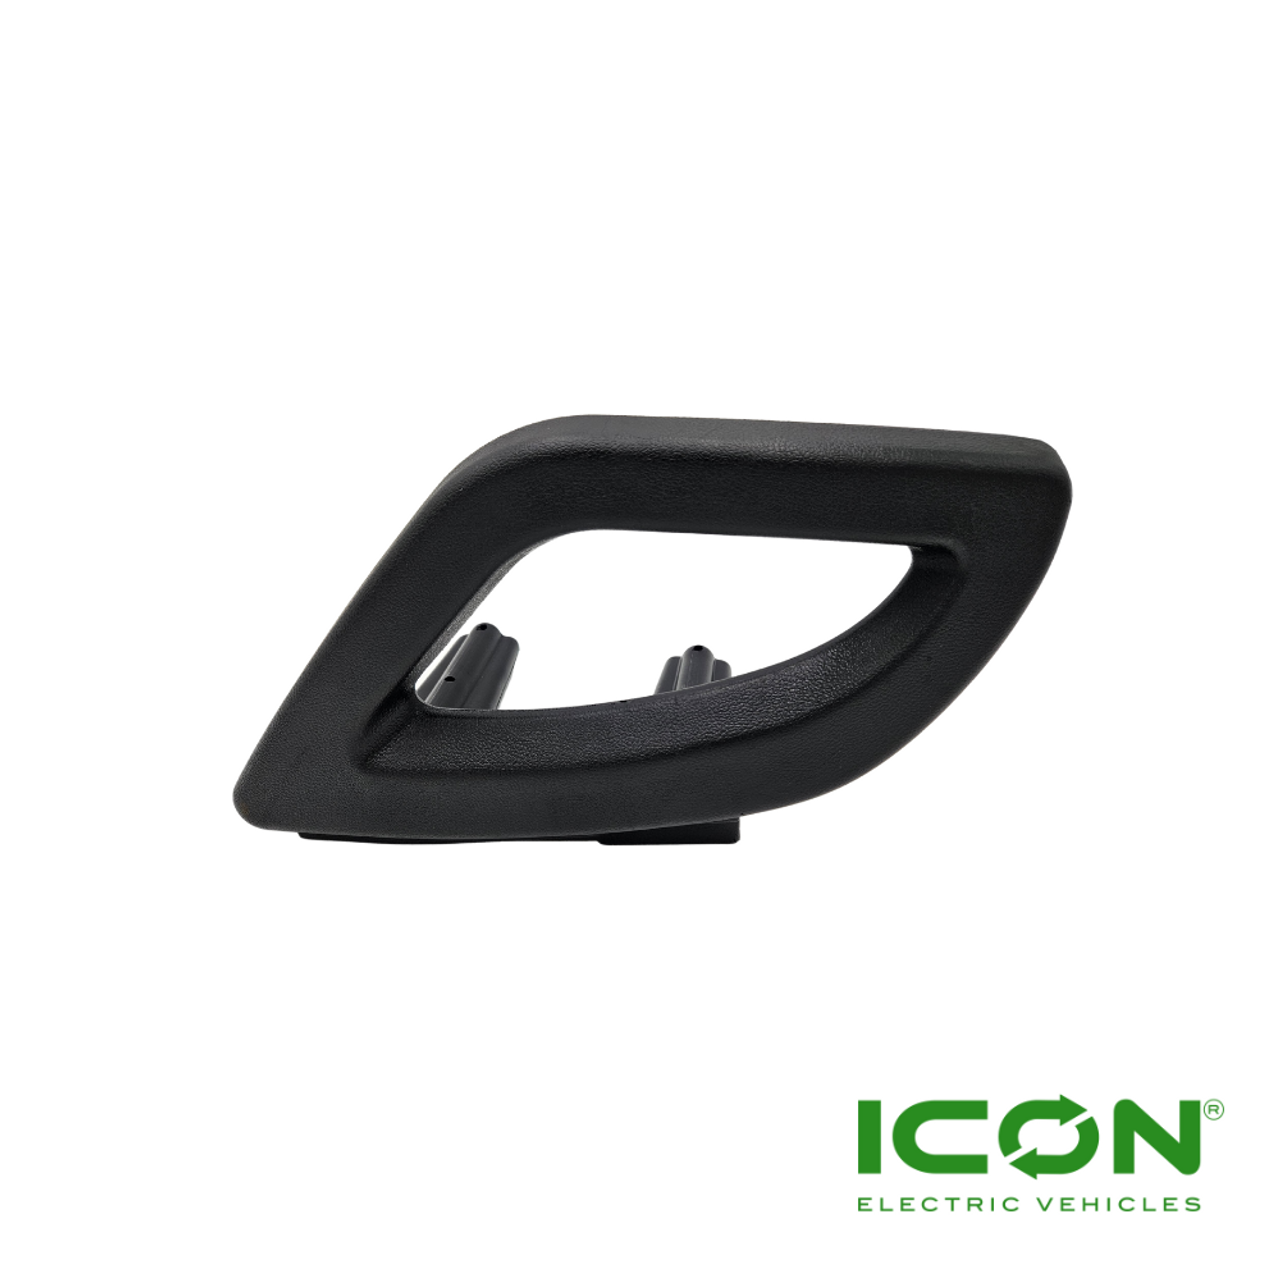 Driver Side (Left) Seat Armrest for ICON Golf Carts, ST-756-IC, 3.02.011.300079, 3.201.16.010121